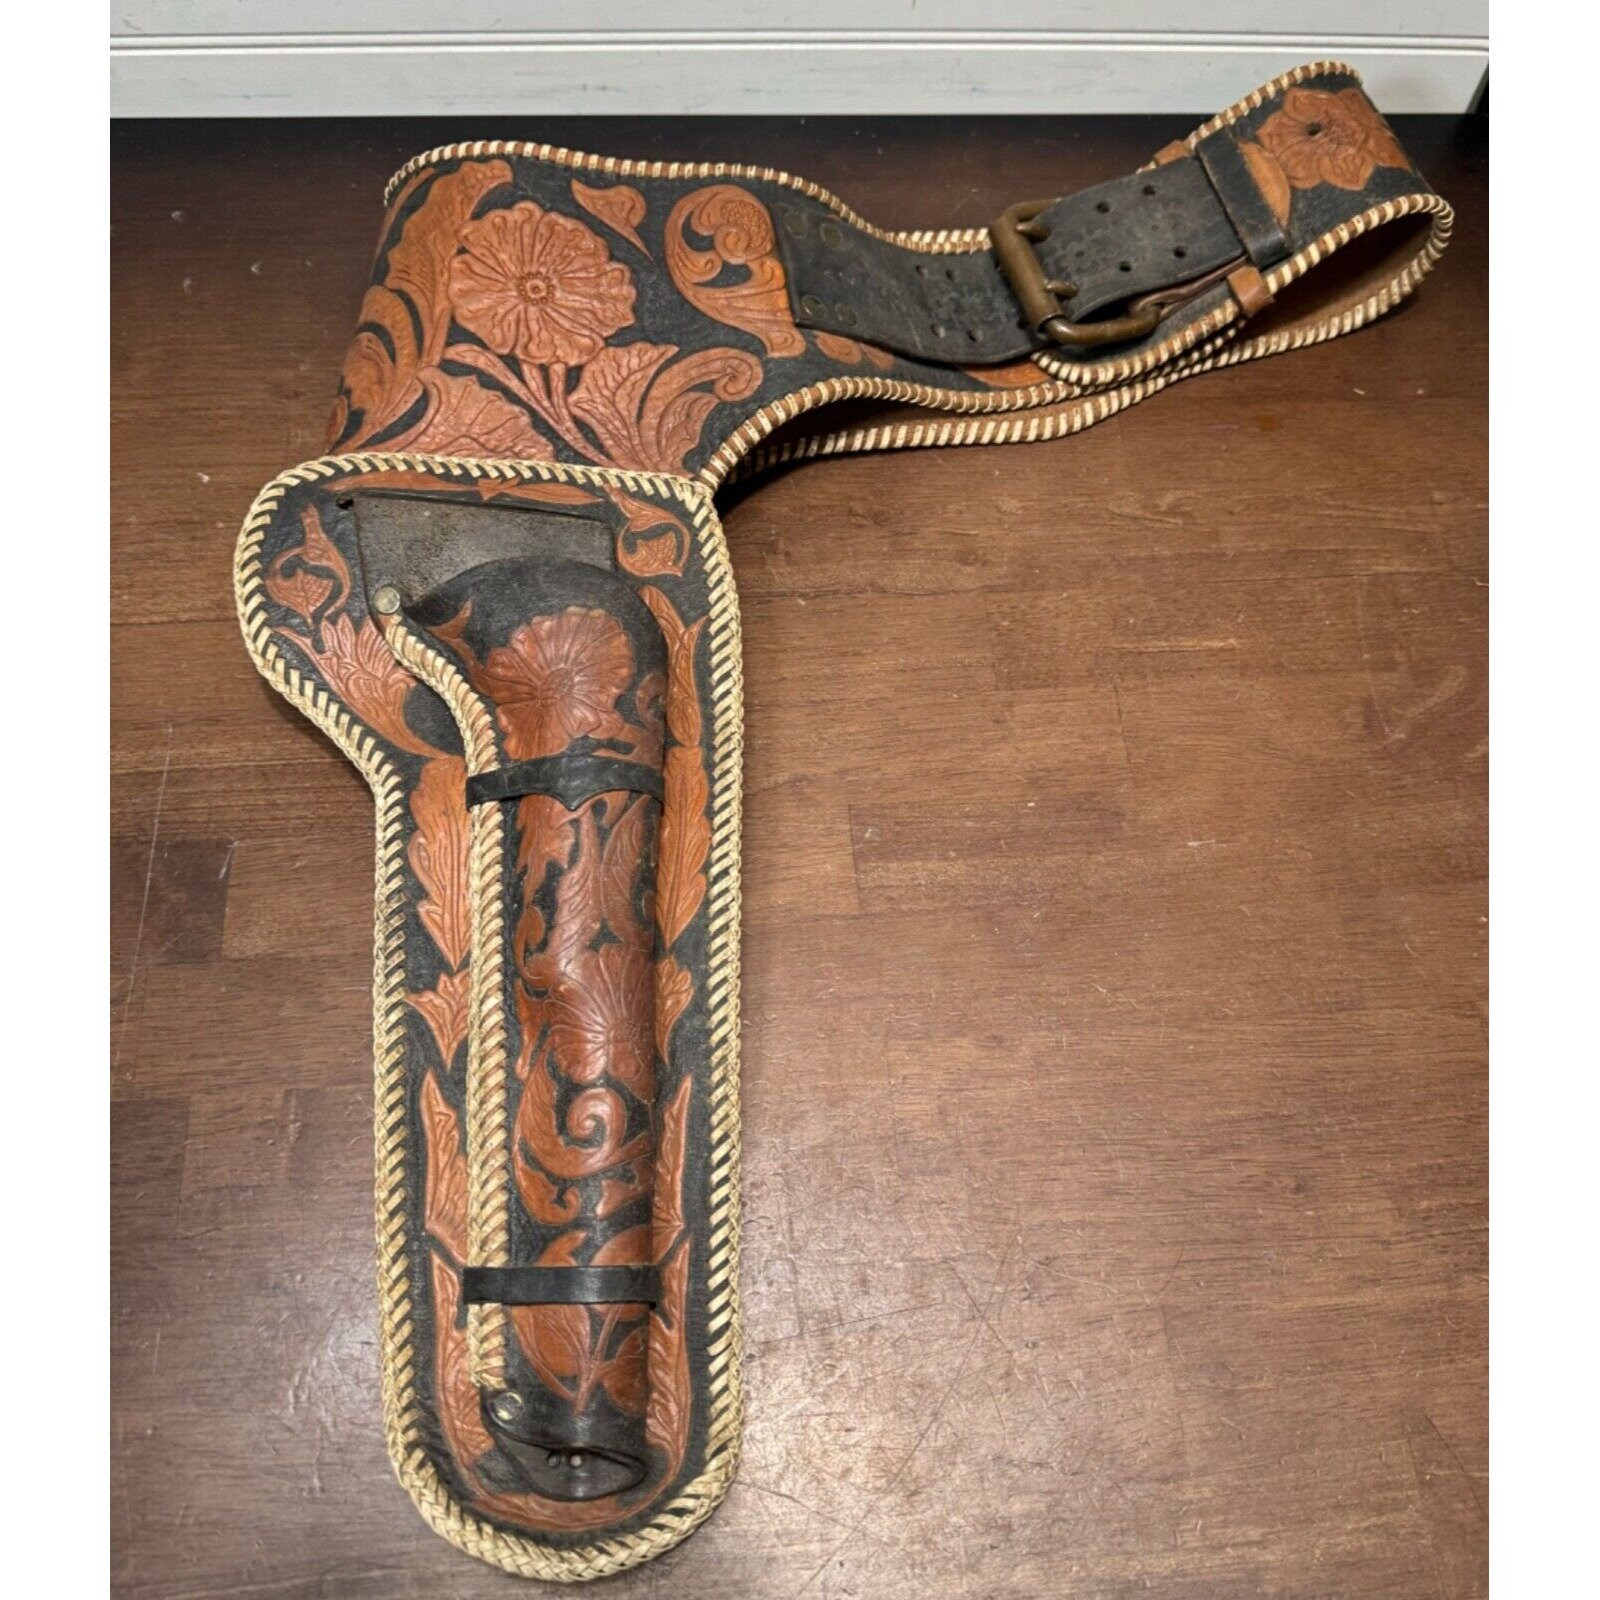 TOOLED LEATHER HOLSTER, Western Reenactment Costume, Tooled Western  Holster, Cowboy Holster and Belt, Horse Head Belt Buckle. Free Shipping 